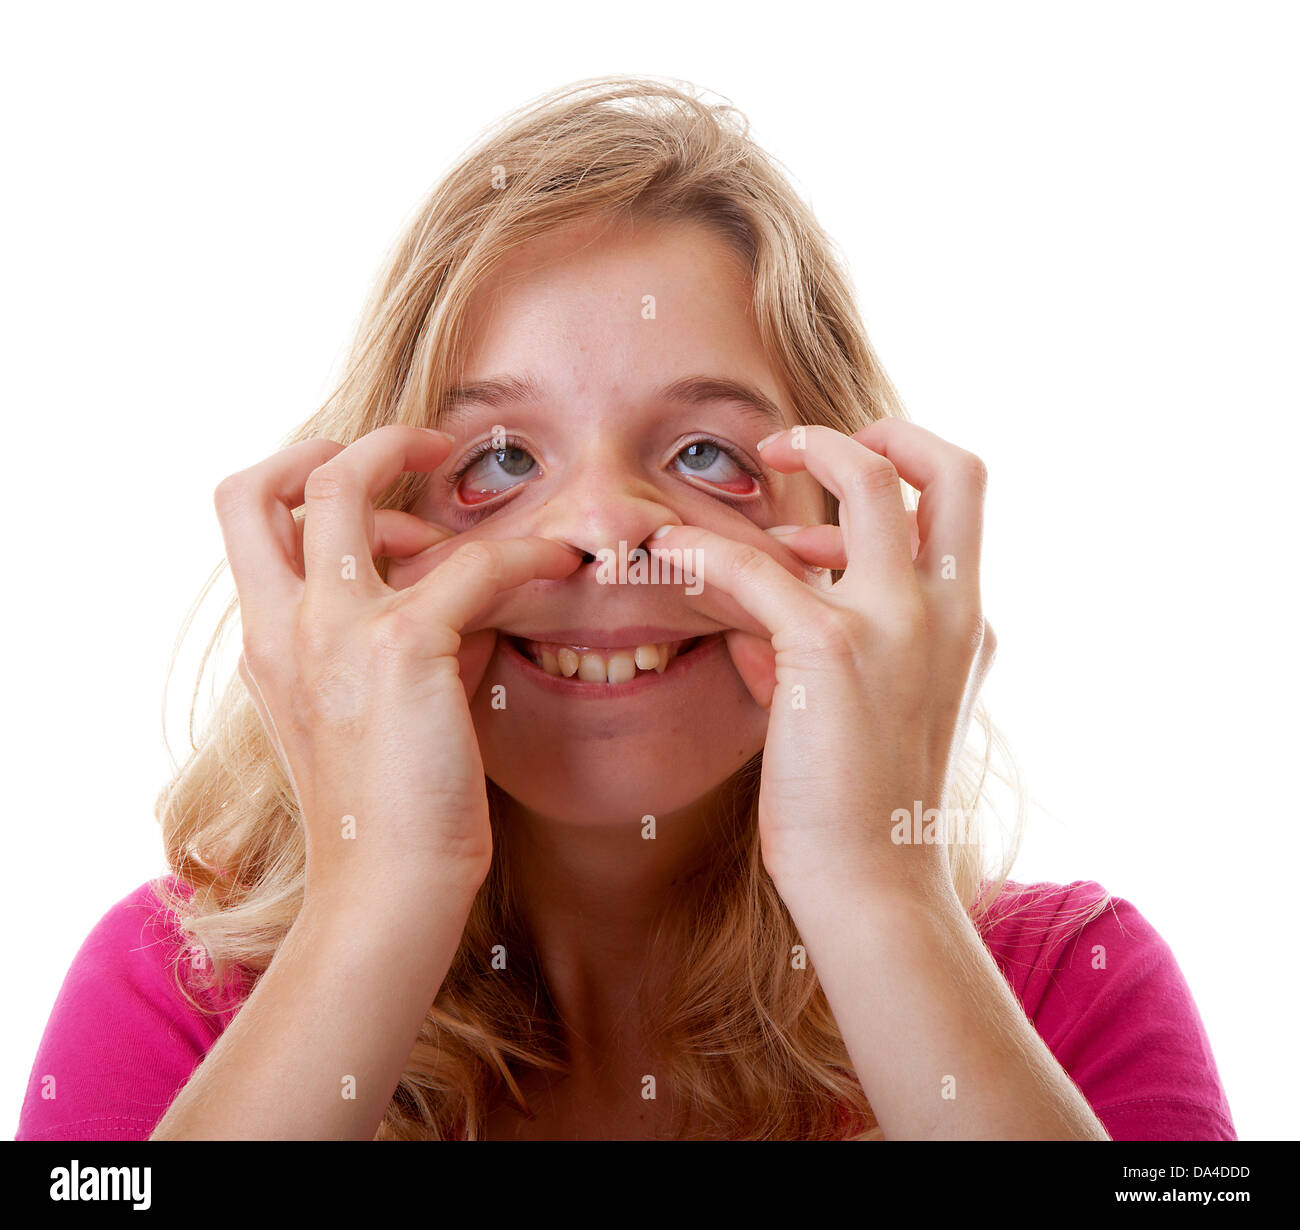 Girl Makes Funny Face In Closeup Over White Background Stock Photo Alamy